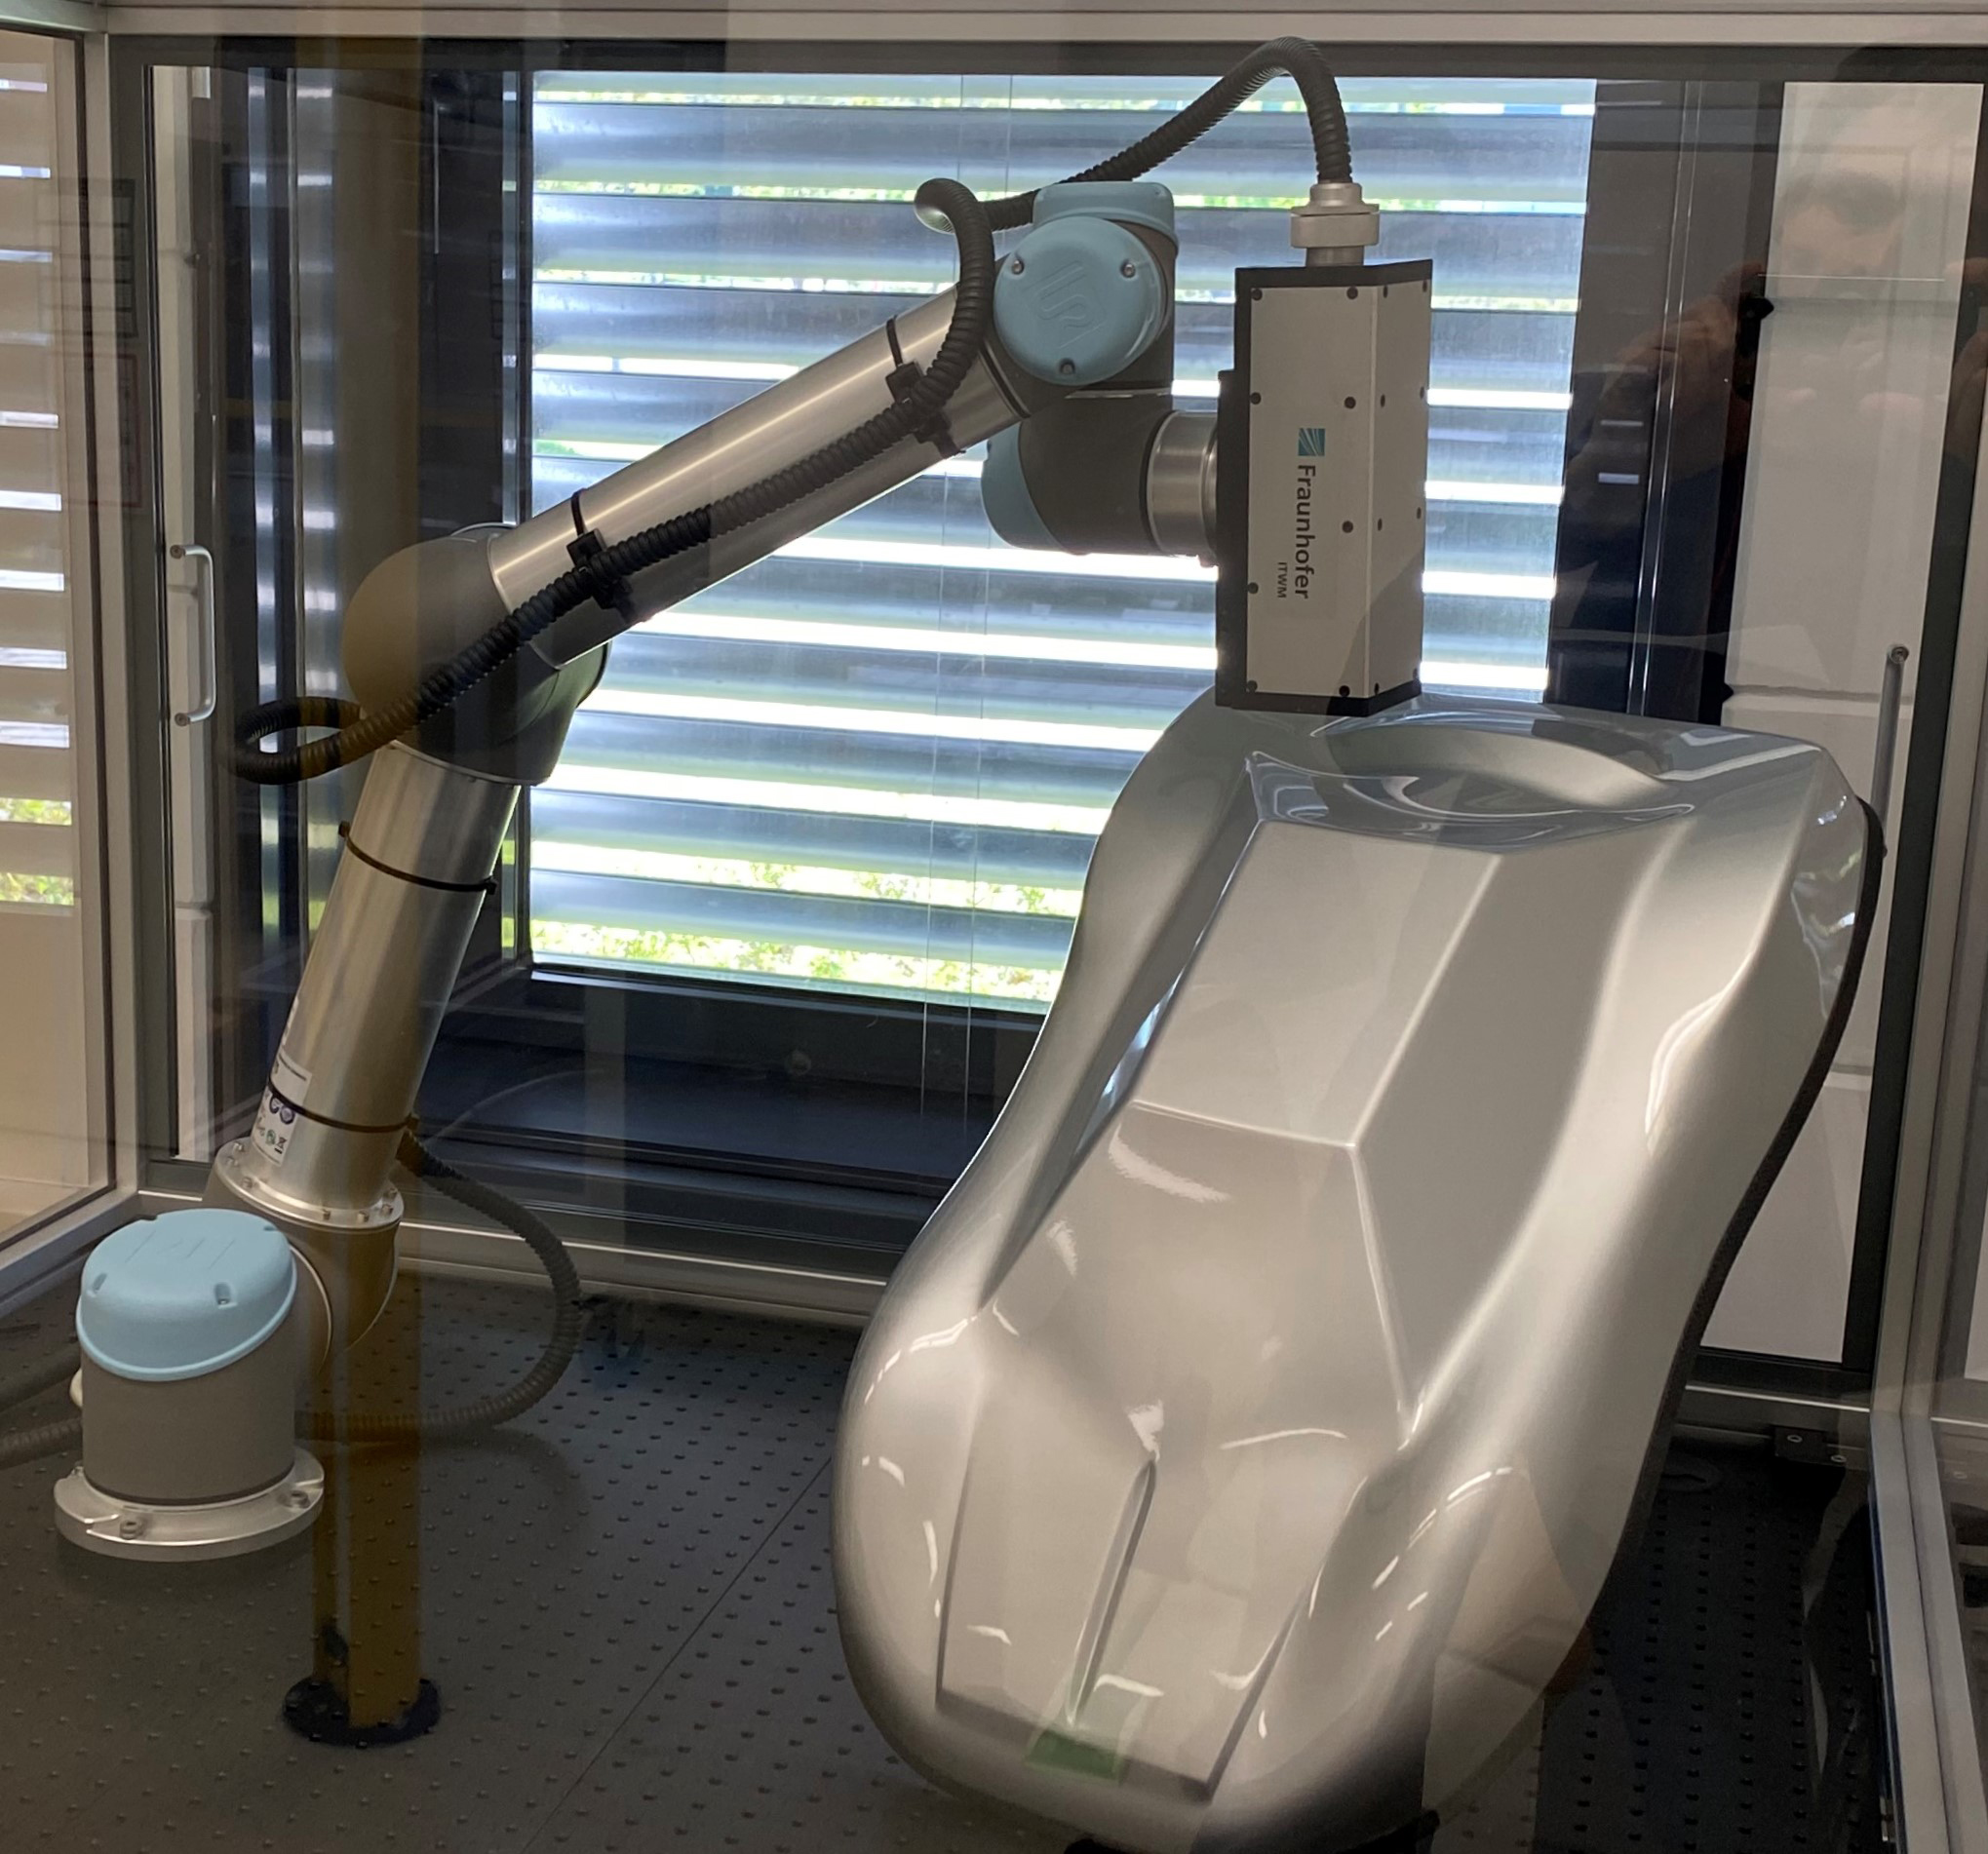 Robot assisted terahertz measuring system for inline inspection of paint coatings